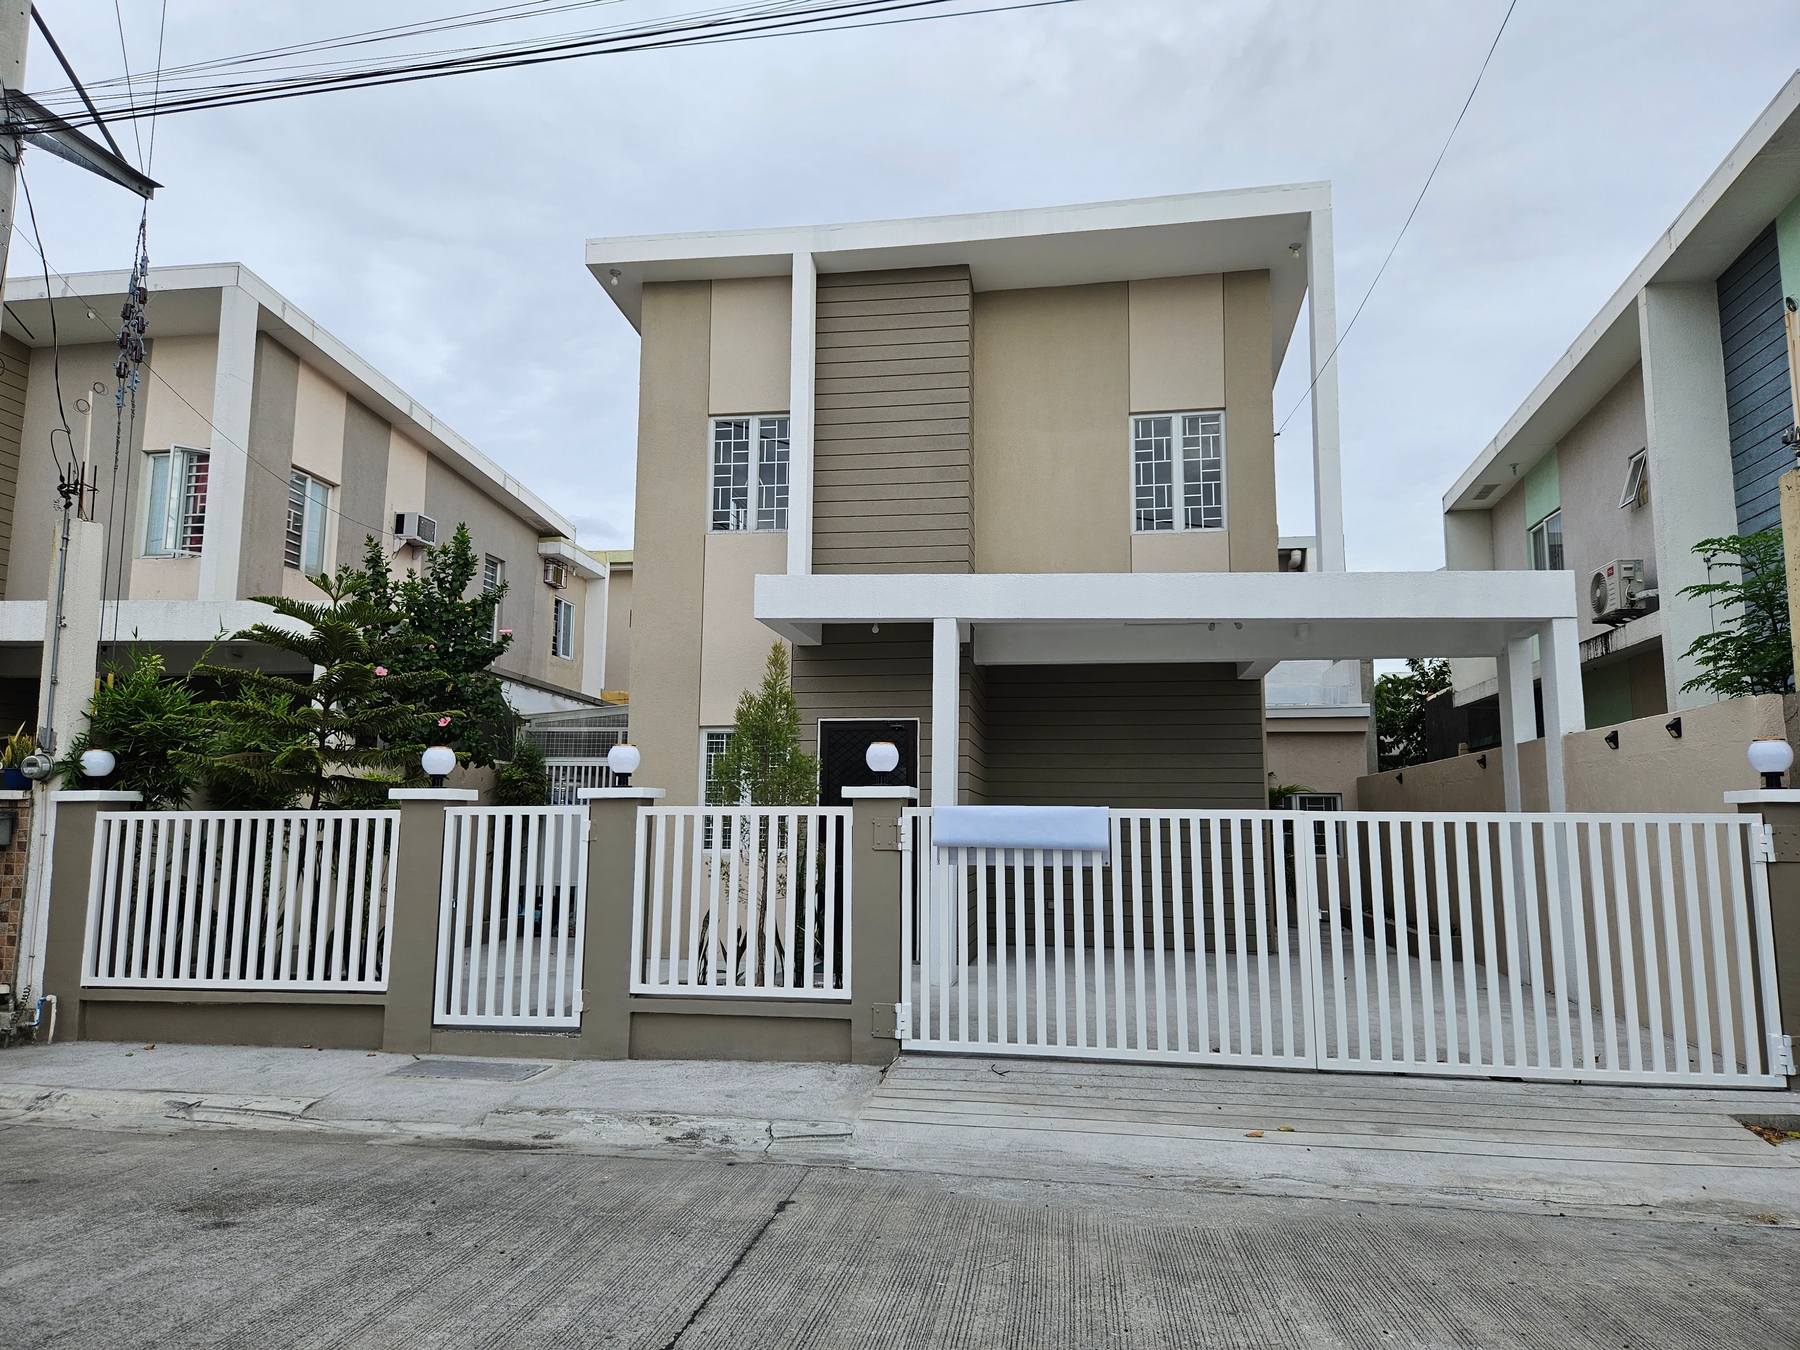 Modern Affordable House in Executive Village Bacoor Cavite